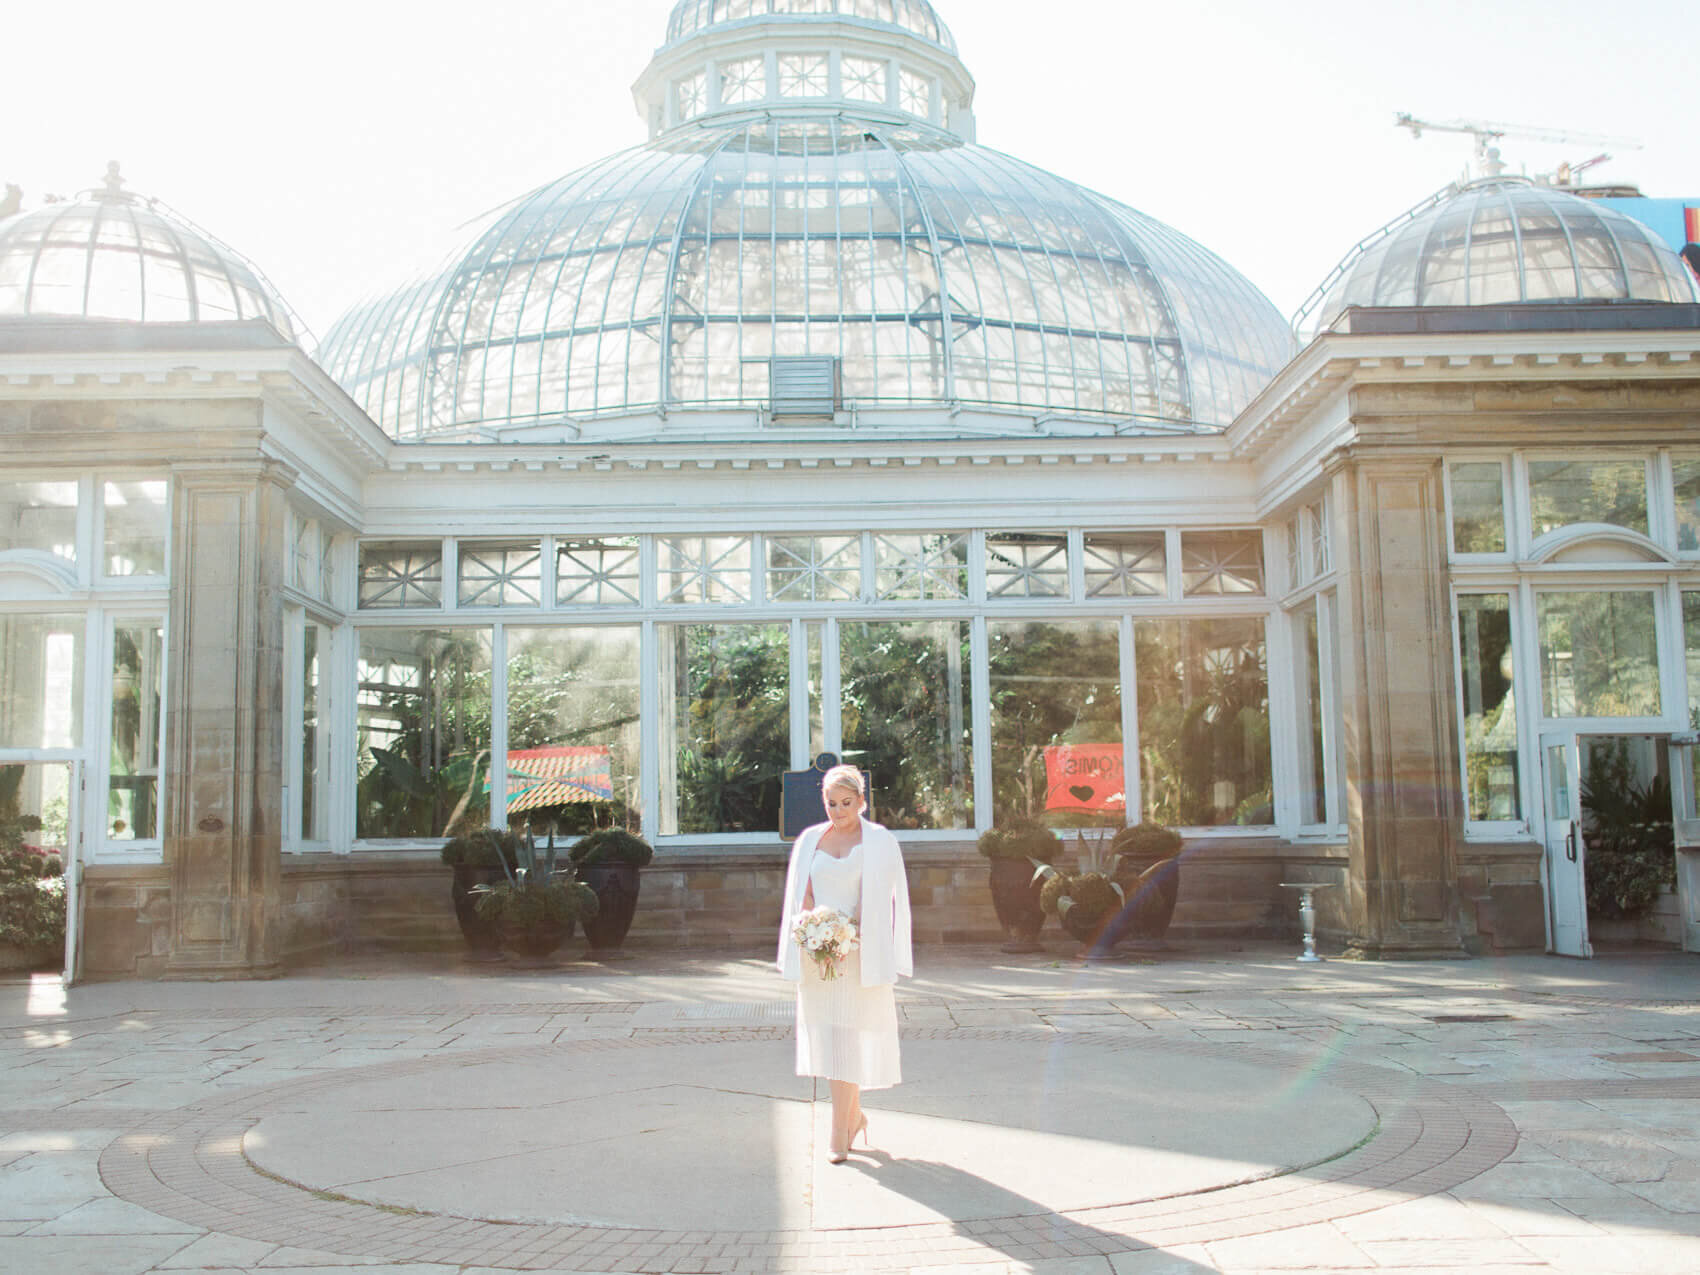 bride posing naturally for candid wedding photographs at her intimate allen gardens elopement